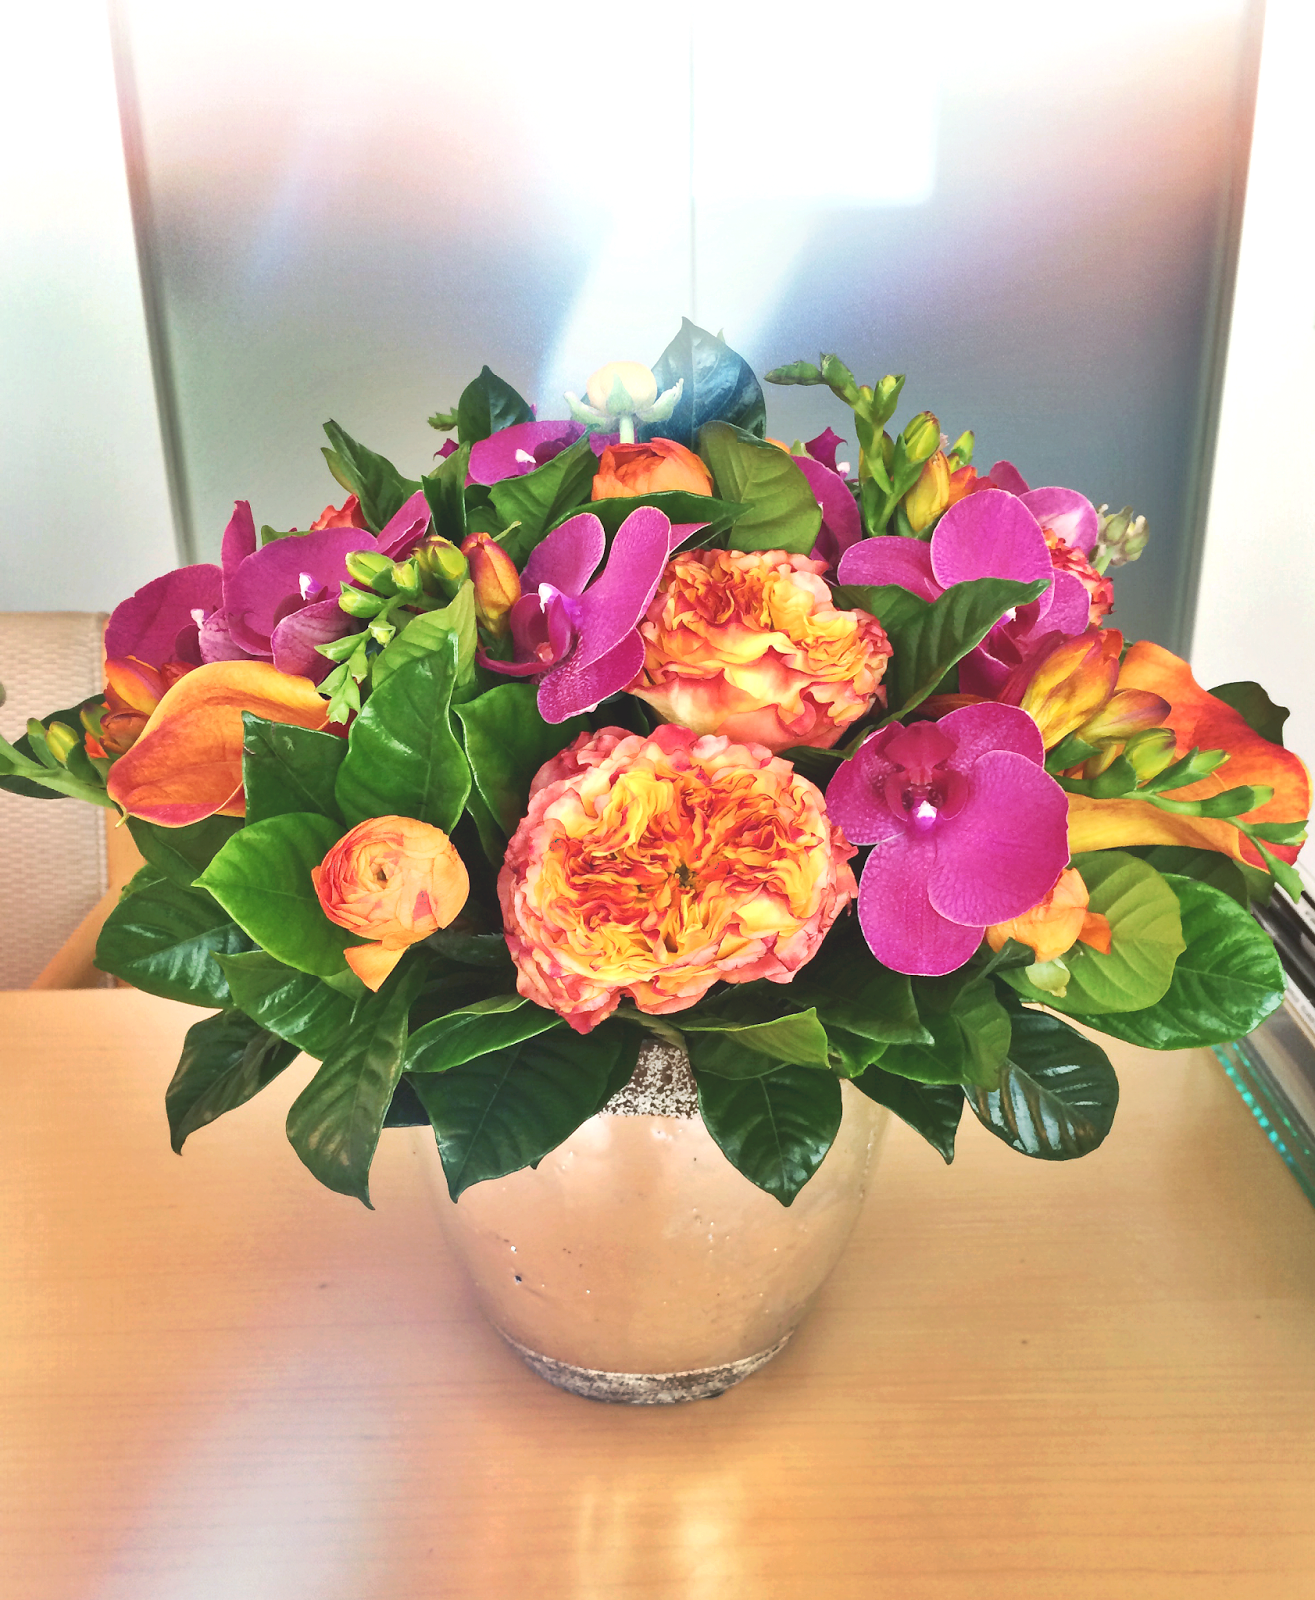 Fall floral arrangement with orange ranunculus, calla lilies and fresia with purple orchids